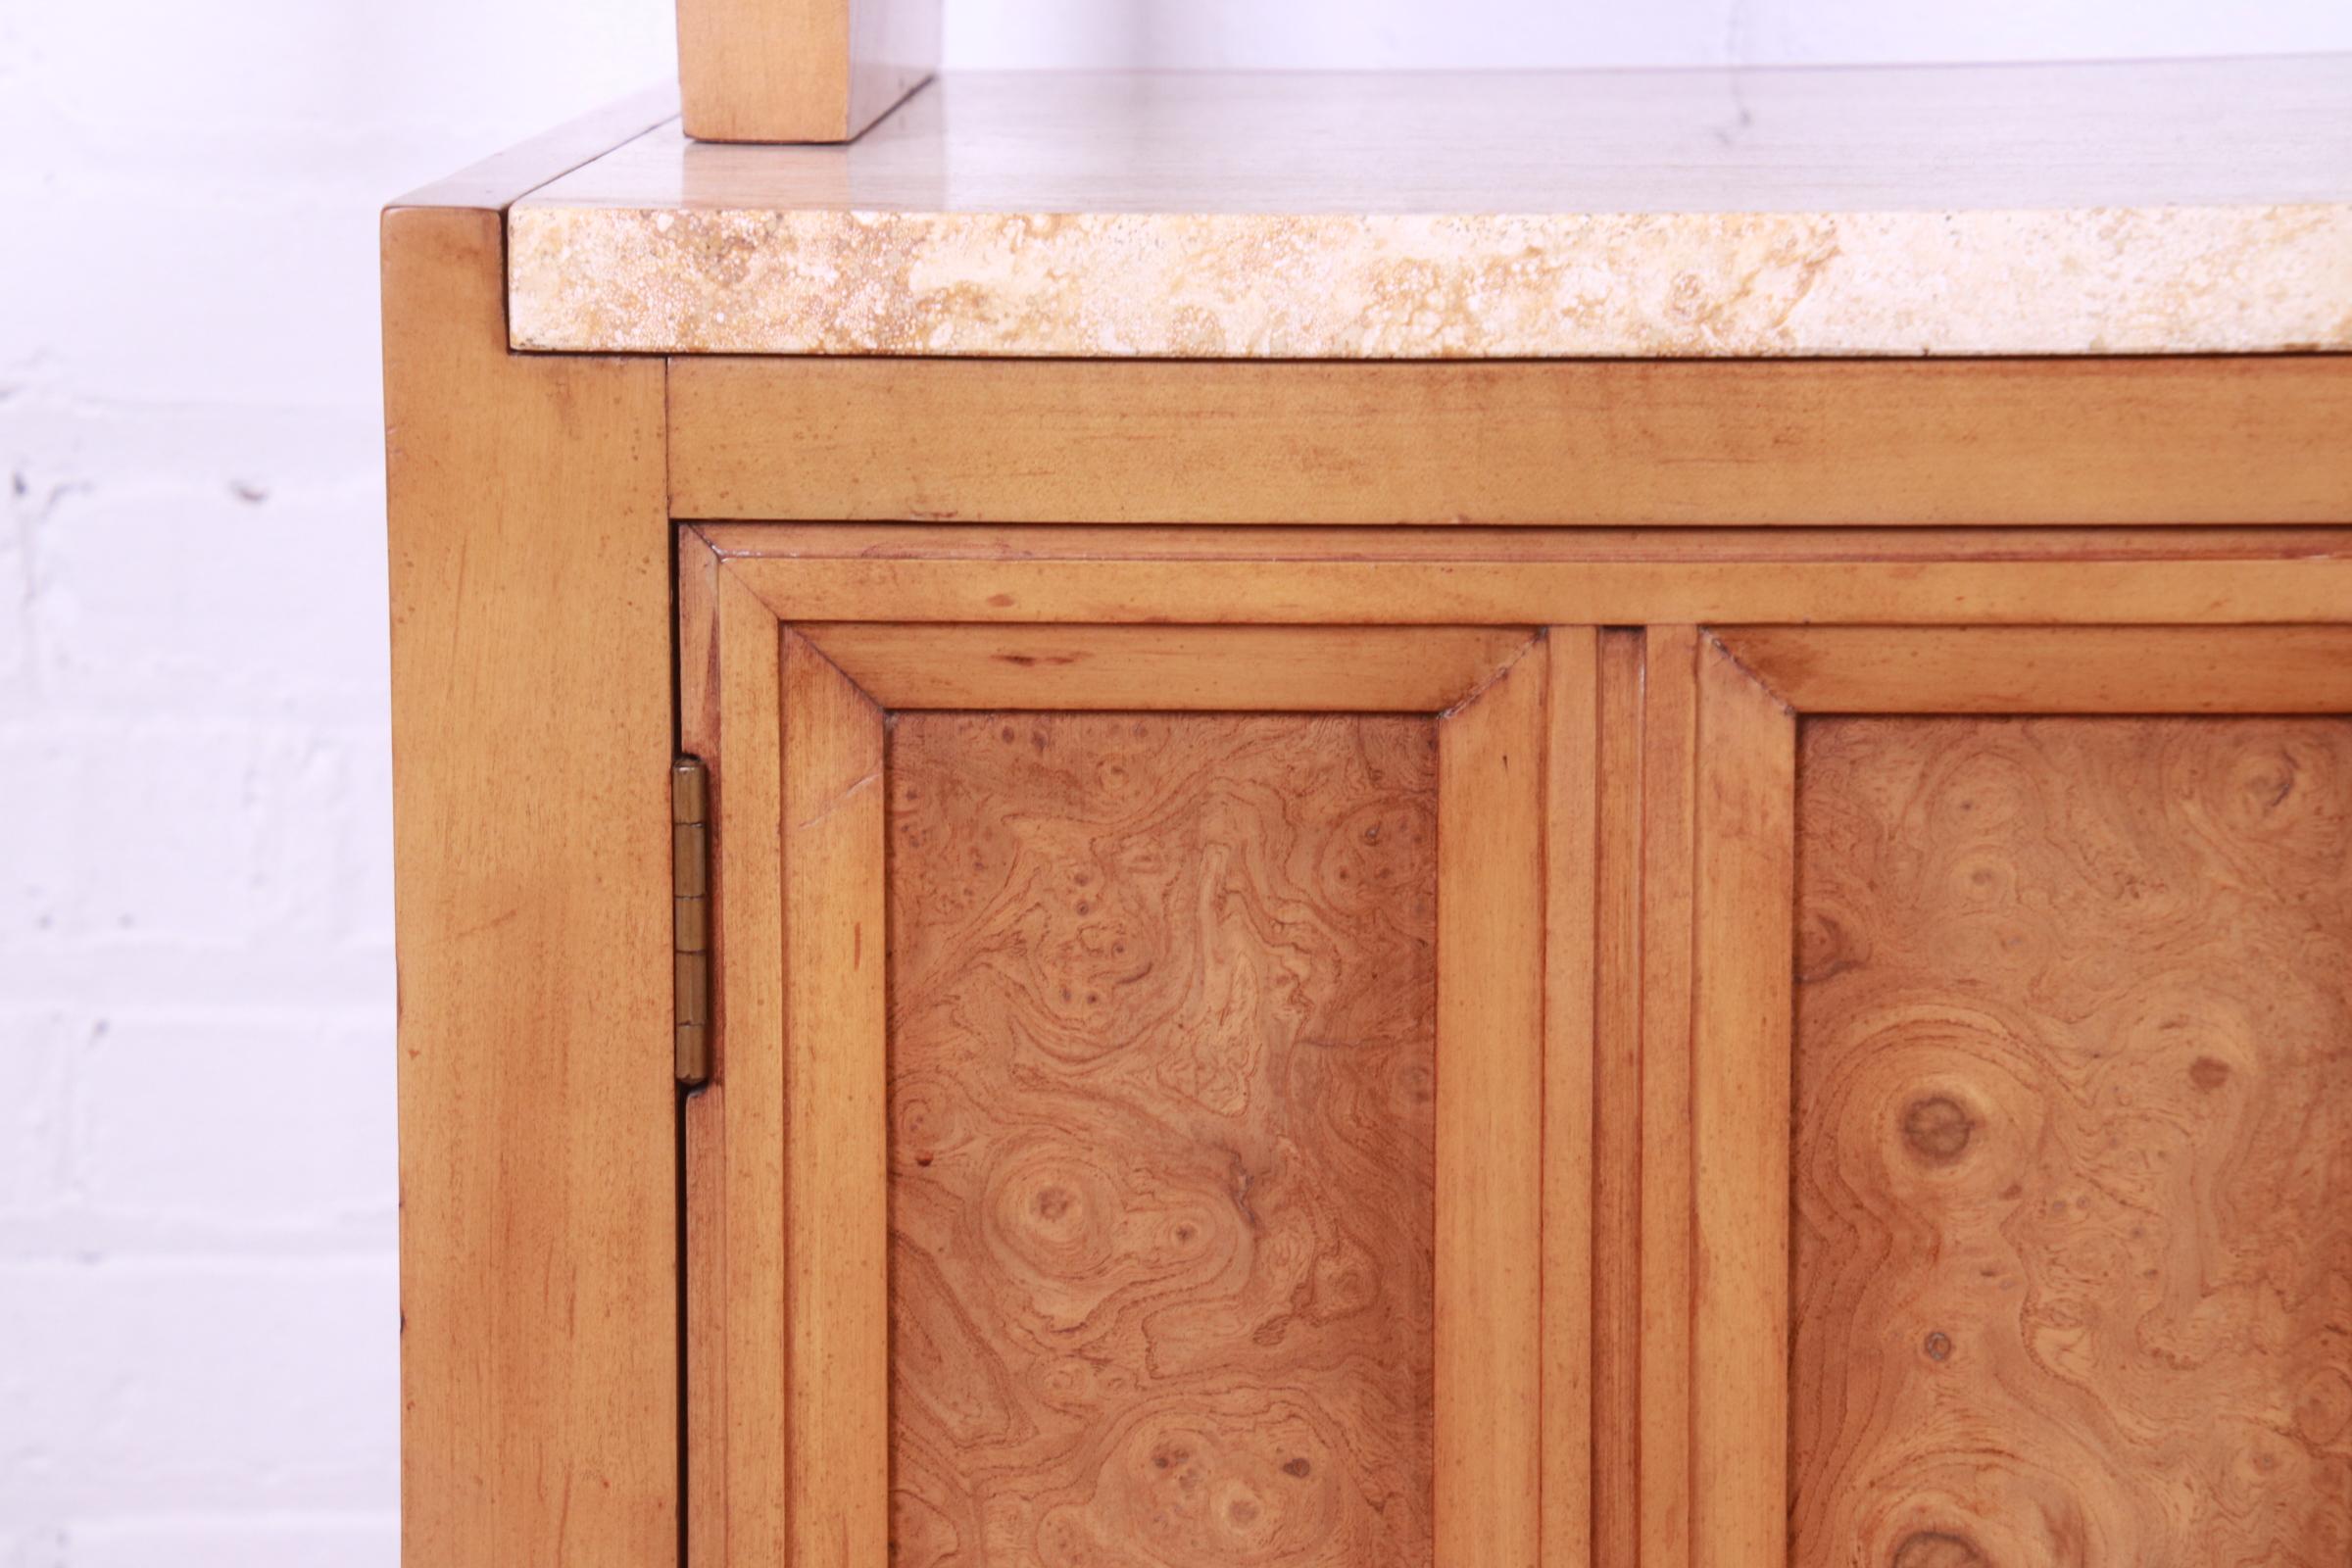 J.L. Metz Sideboard or Bar Cabinet in Cherry, Burl, Travertine, and Brass 3